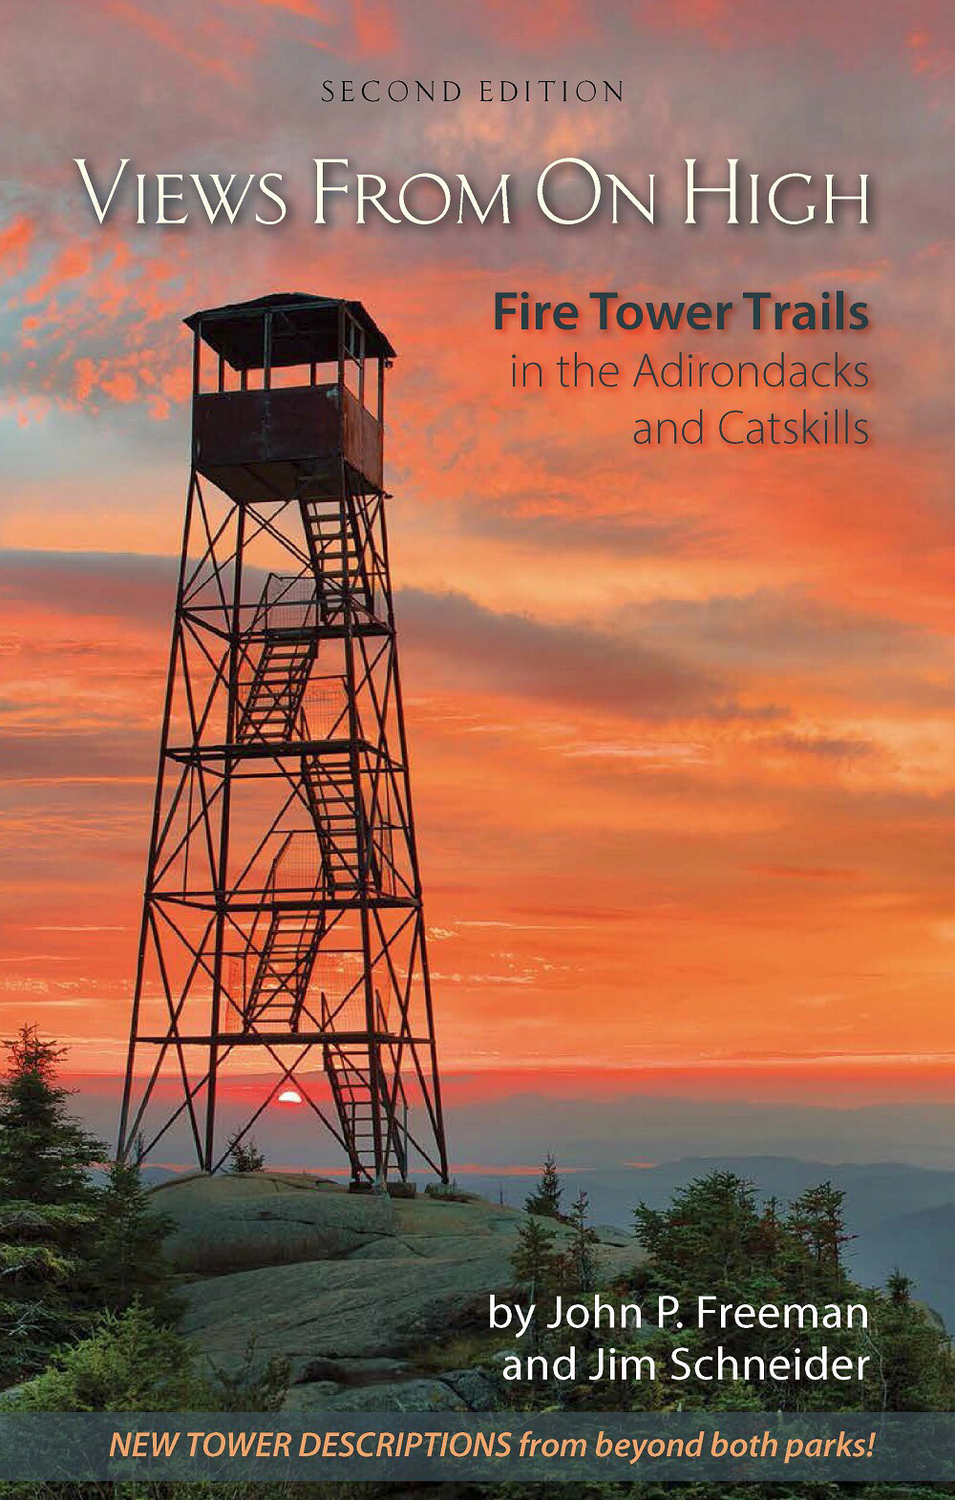 Views from on High: Fire Tower Trails in the Adirondacks and Catskills